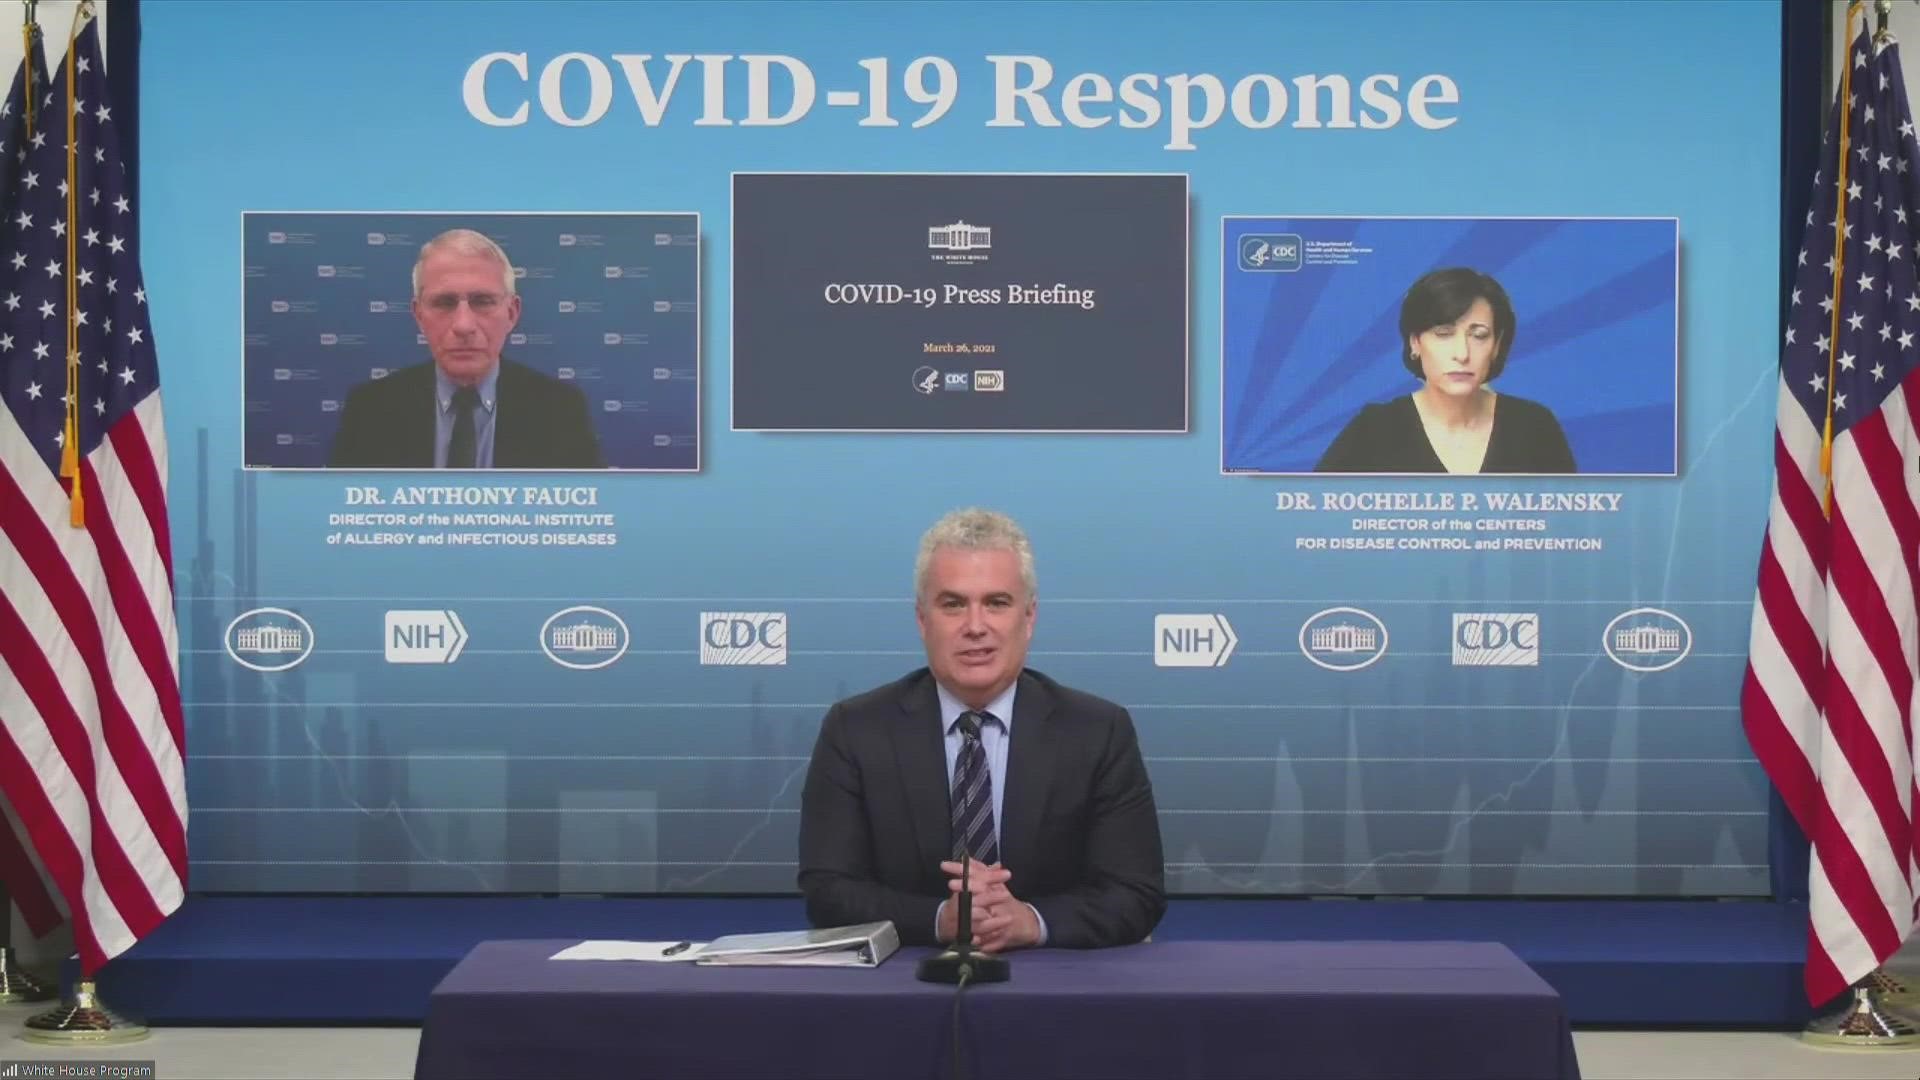 The White House COVID-19 Response Team and federal public health officials will hold a press briefing to provide updates on the COVID-19 response effort.